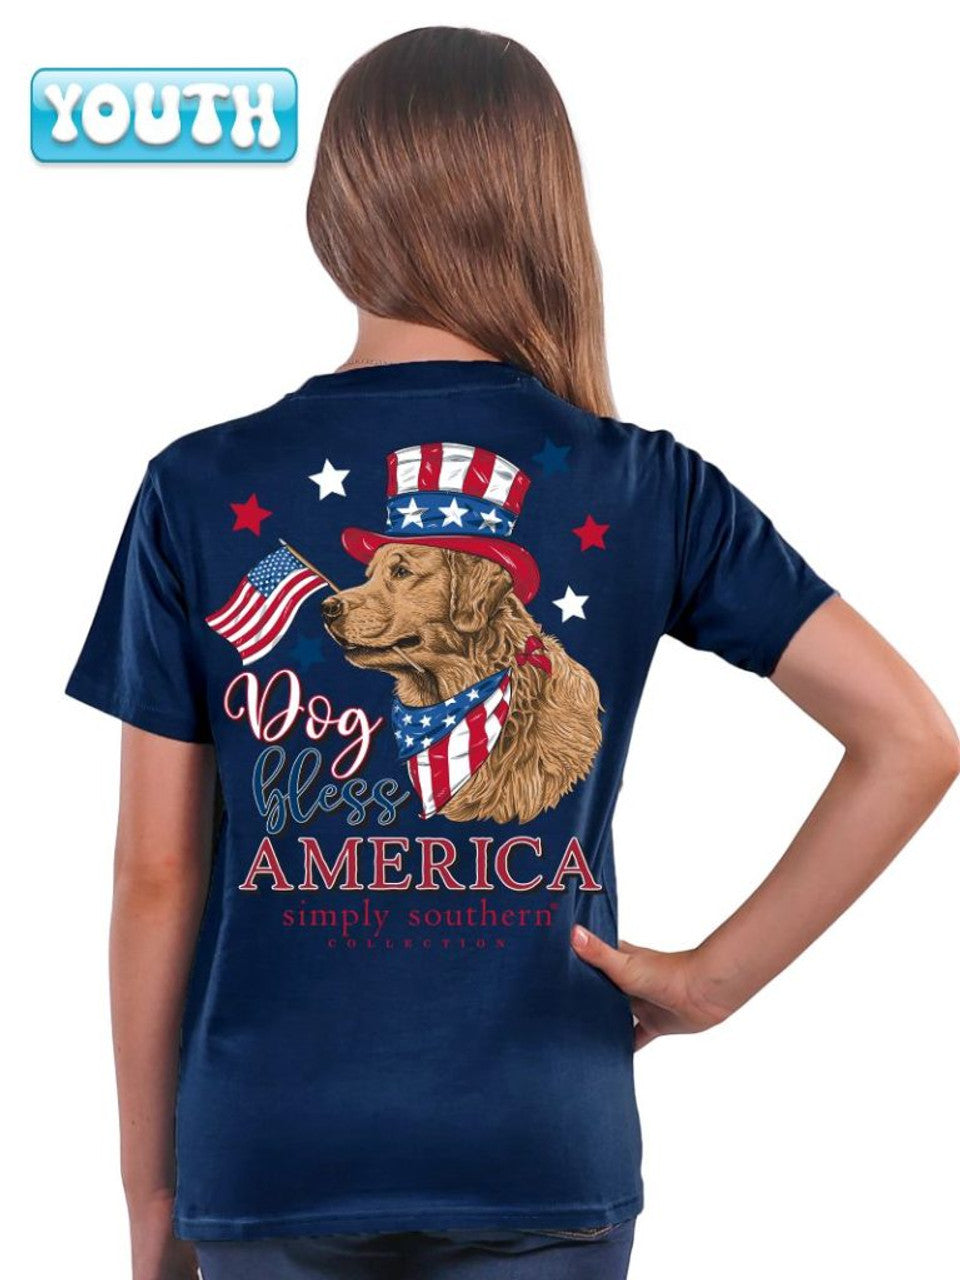 YOUTH - DOG BLESS AMERICA SS - NAVY